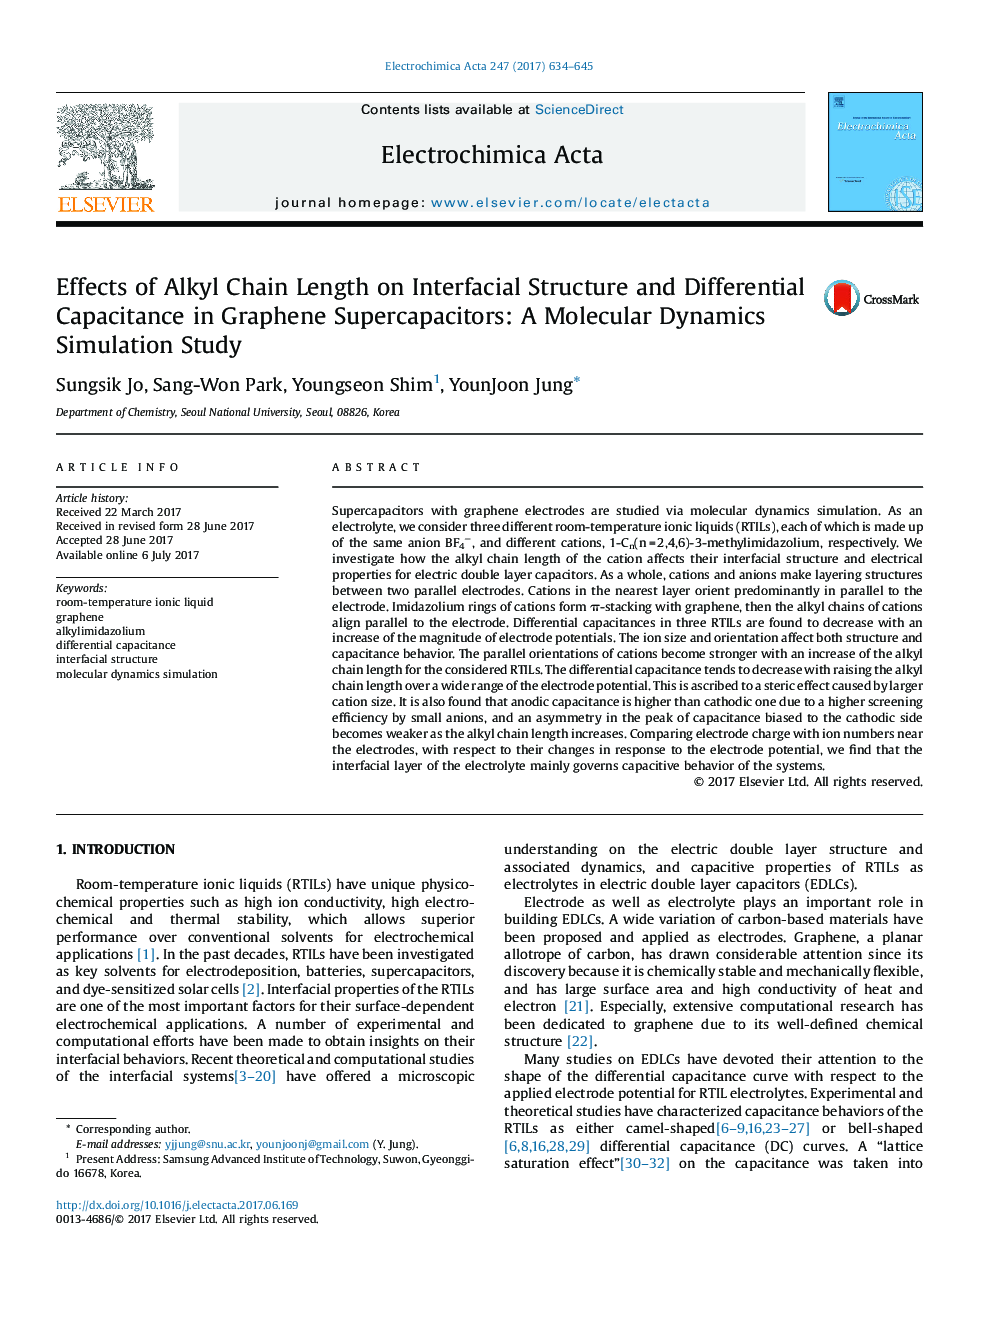 Effects of Alkyl Chain Length on Interfacial Structure and Differential Capacitance in Graphene Supercapacitors: A Molecular Dynamics Simulation Study